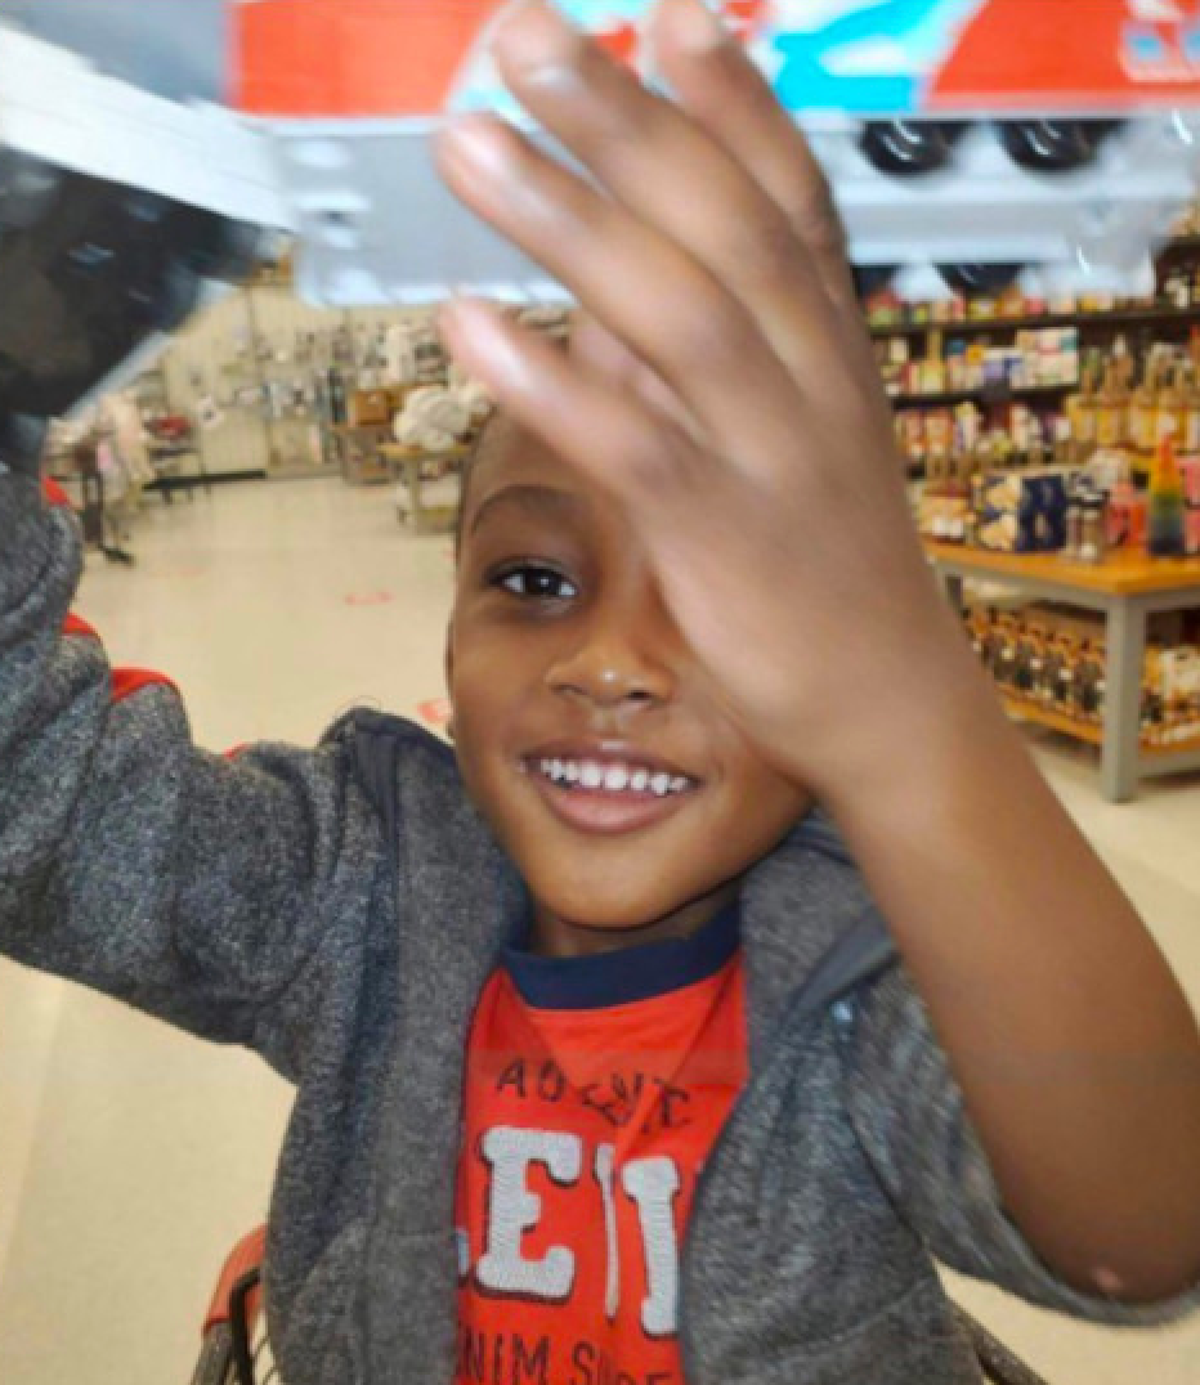 Cairo Jordan was five when he was killed and his body placed inside a suitcase (Indiana State Police)